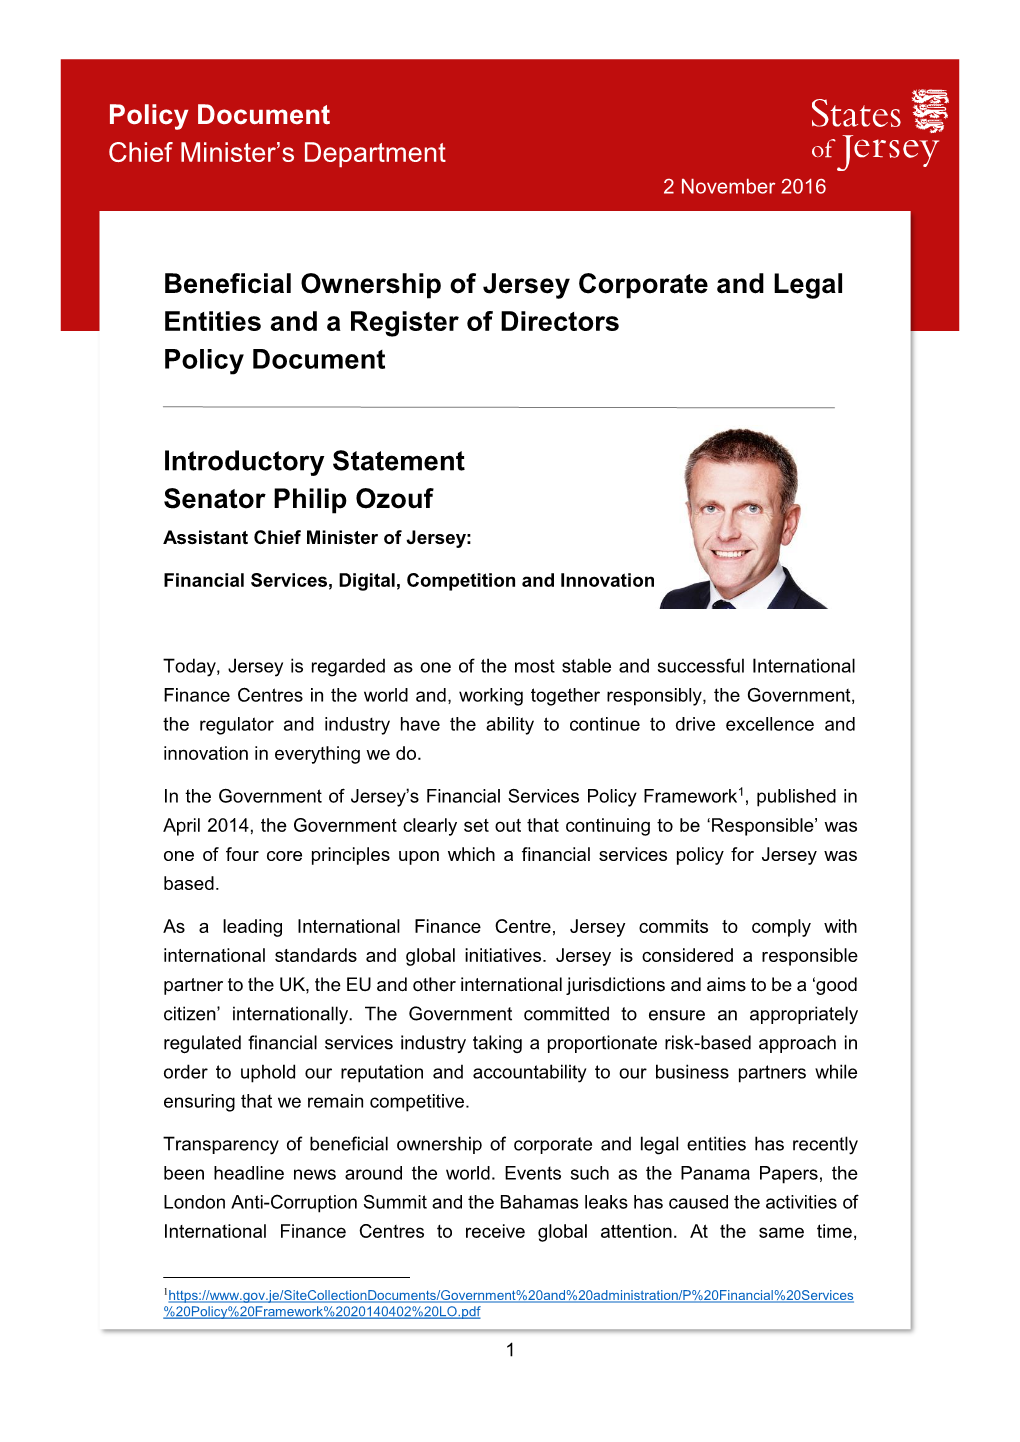 Beneficial Ownership of Jersey Corporate and Legal Entities and a Register of Directors Policy Document